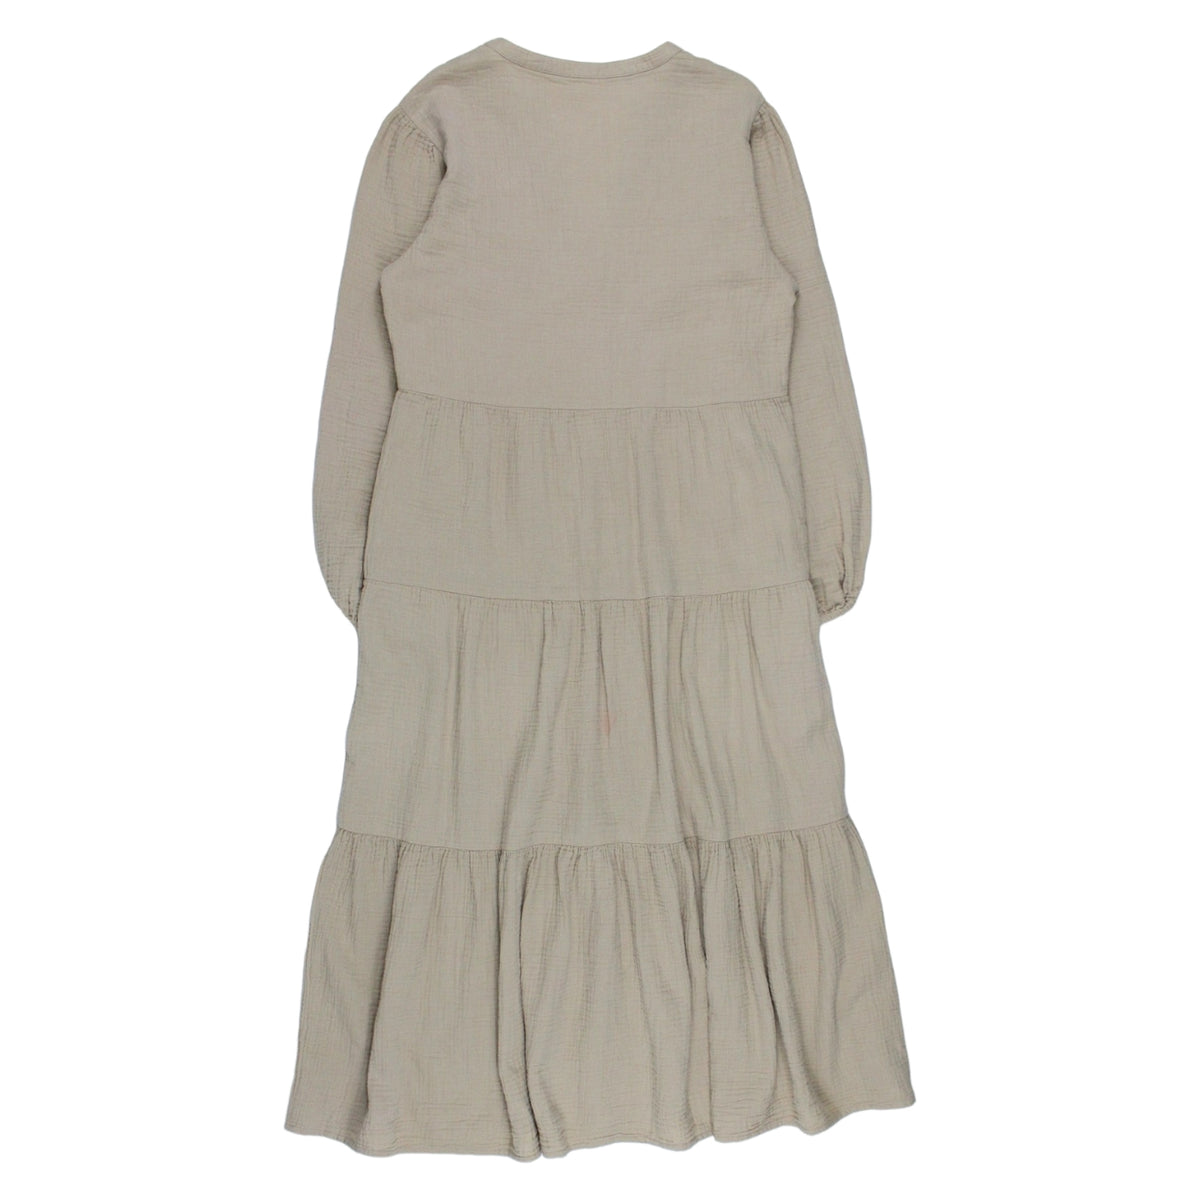 NRBY Stone Cheesecloth Midaxi Dress - Sample